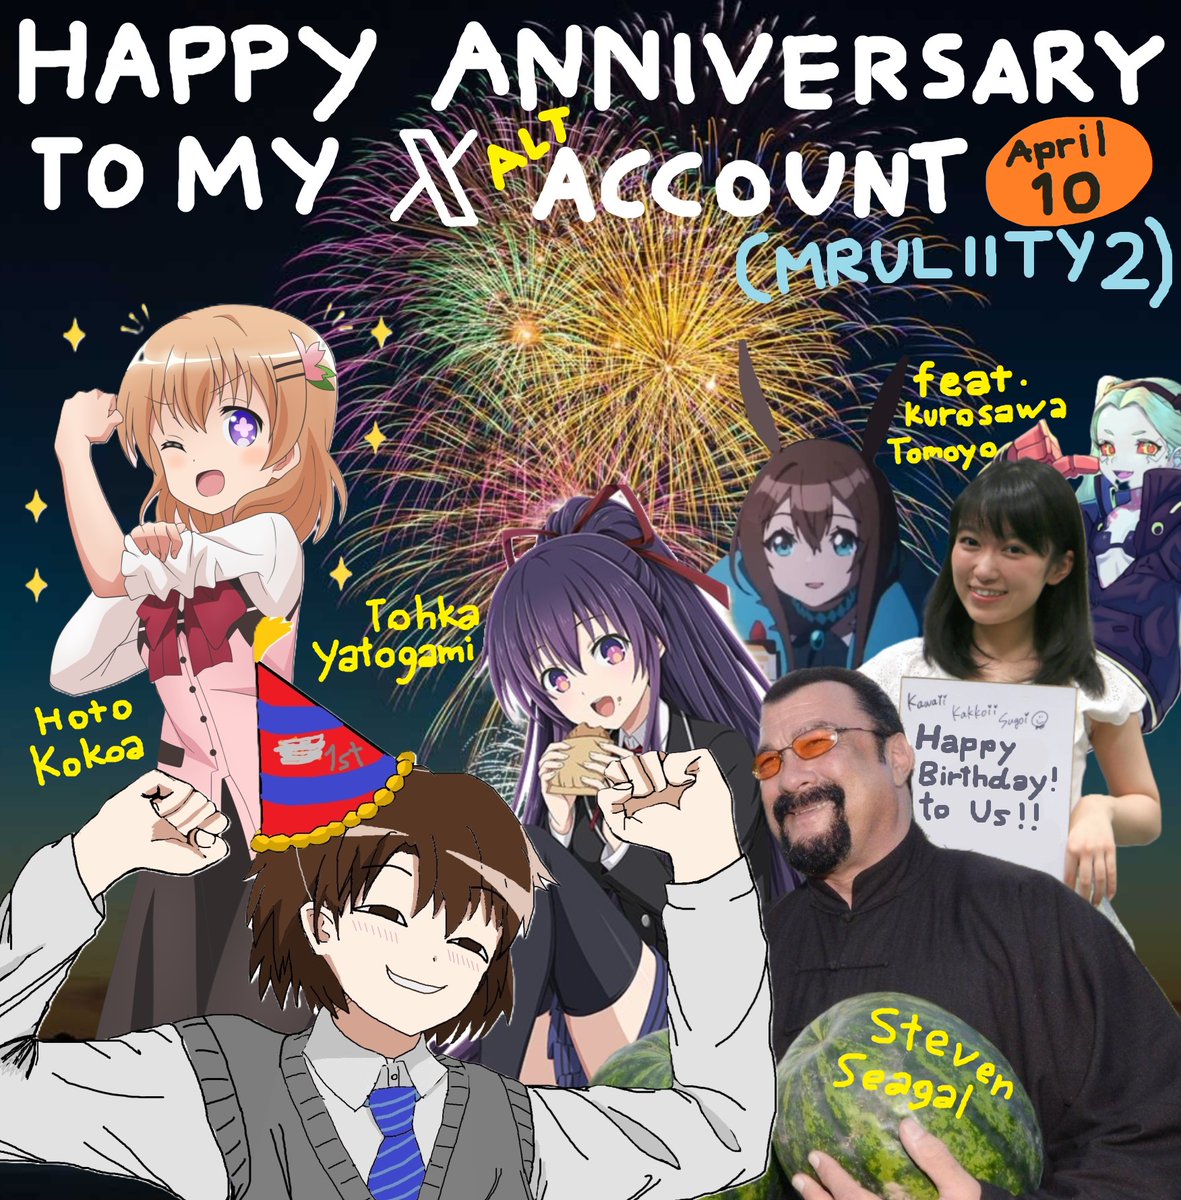 Today is my FIRST X/Twitter ALT Account's Anniversary!!!🎉🎊🎉

So i made this Meme Myself...(however, it wasn't enough to celebrate big) Enjoy❤️

#JustJaidenThings #MyXAnniversary
#Meme #HappyBirthday
#StevenSeagal #TomoyoKurosawa
#CocoaHoto #TohkaYatogami